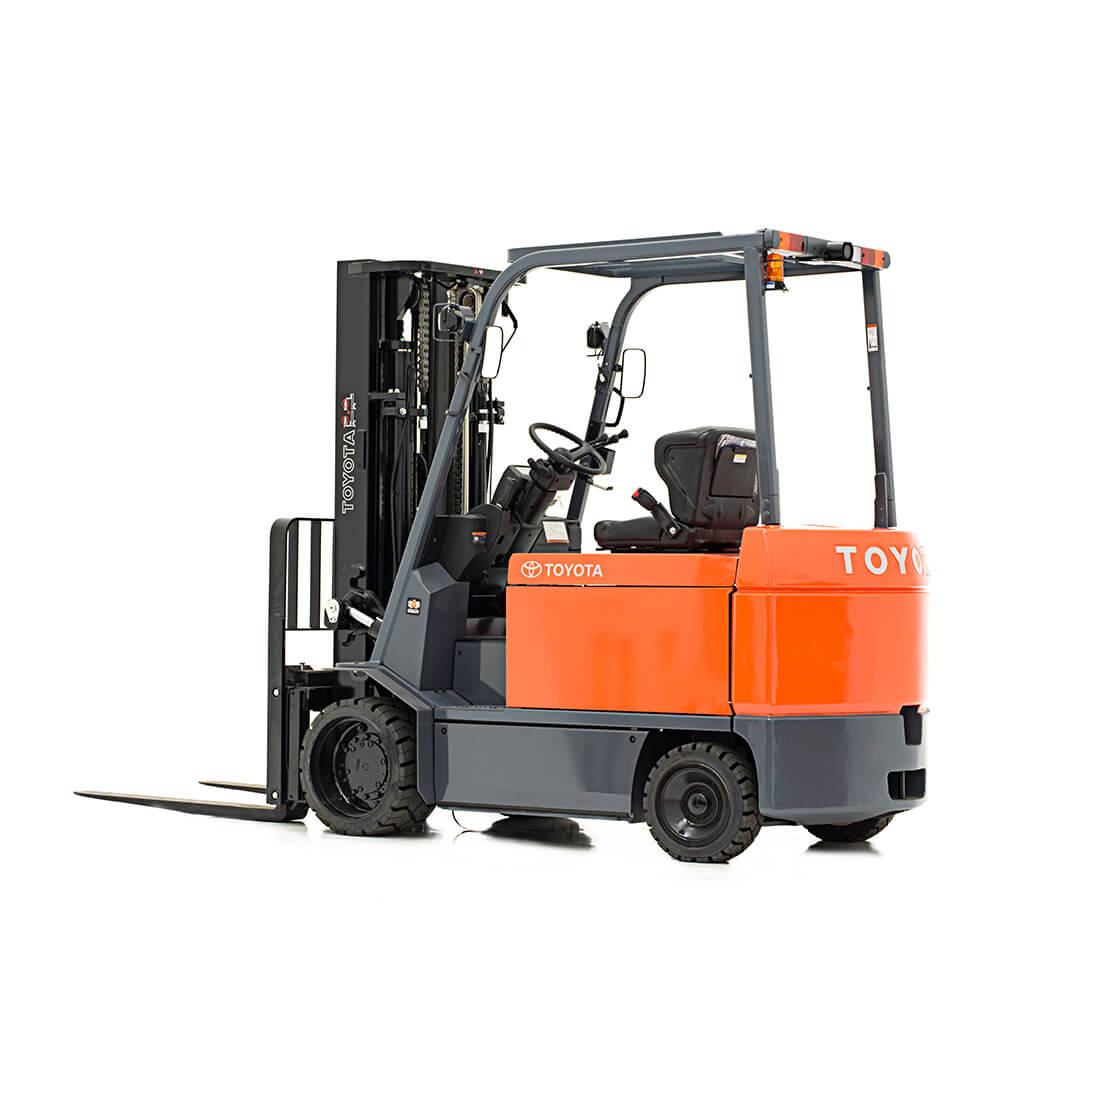 Large Electric Forklift side view